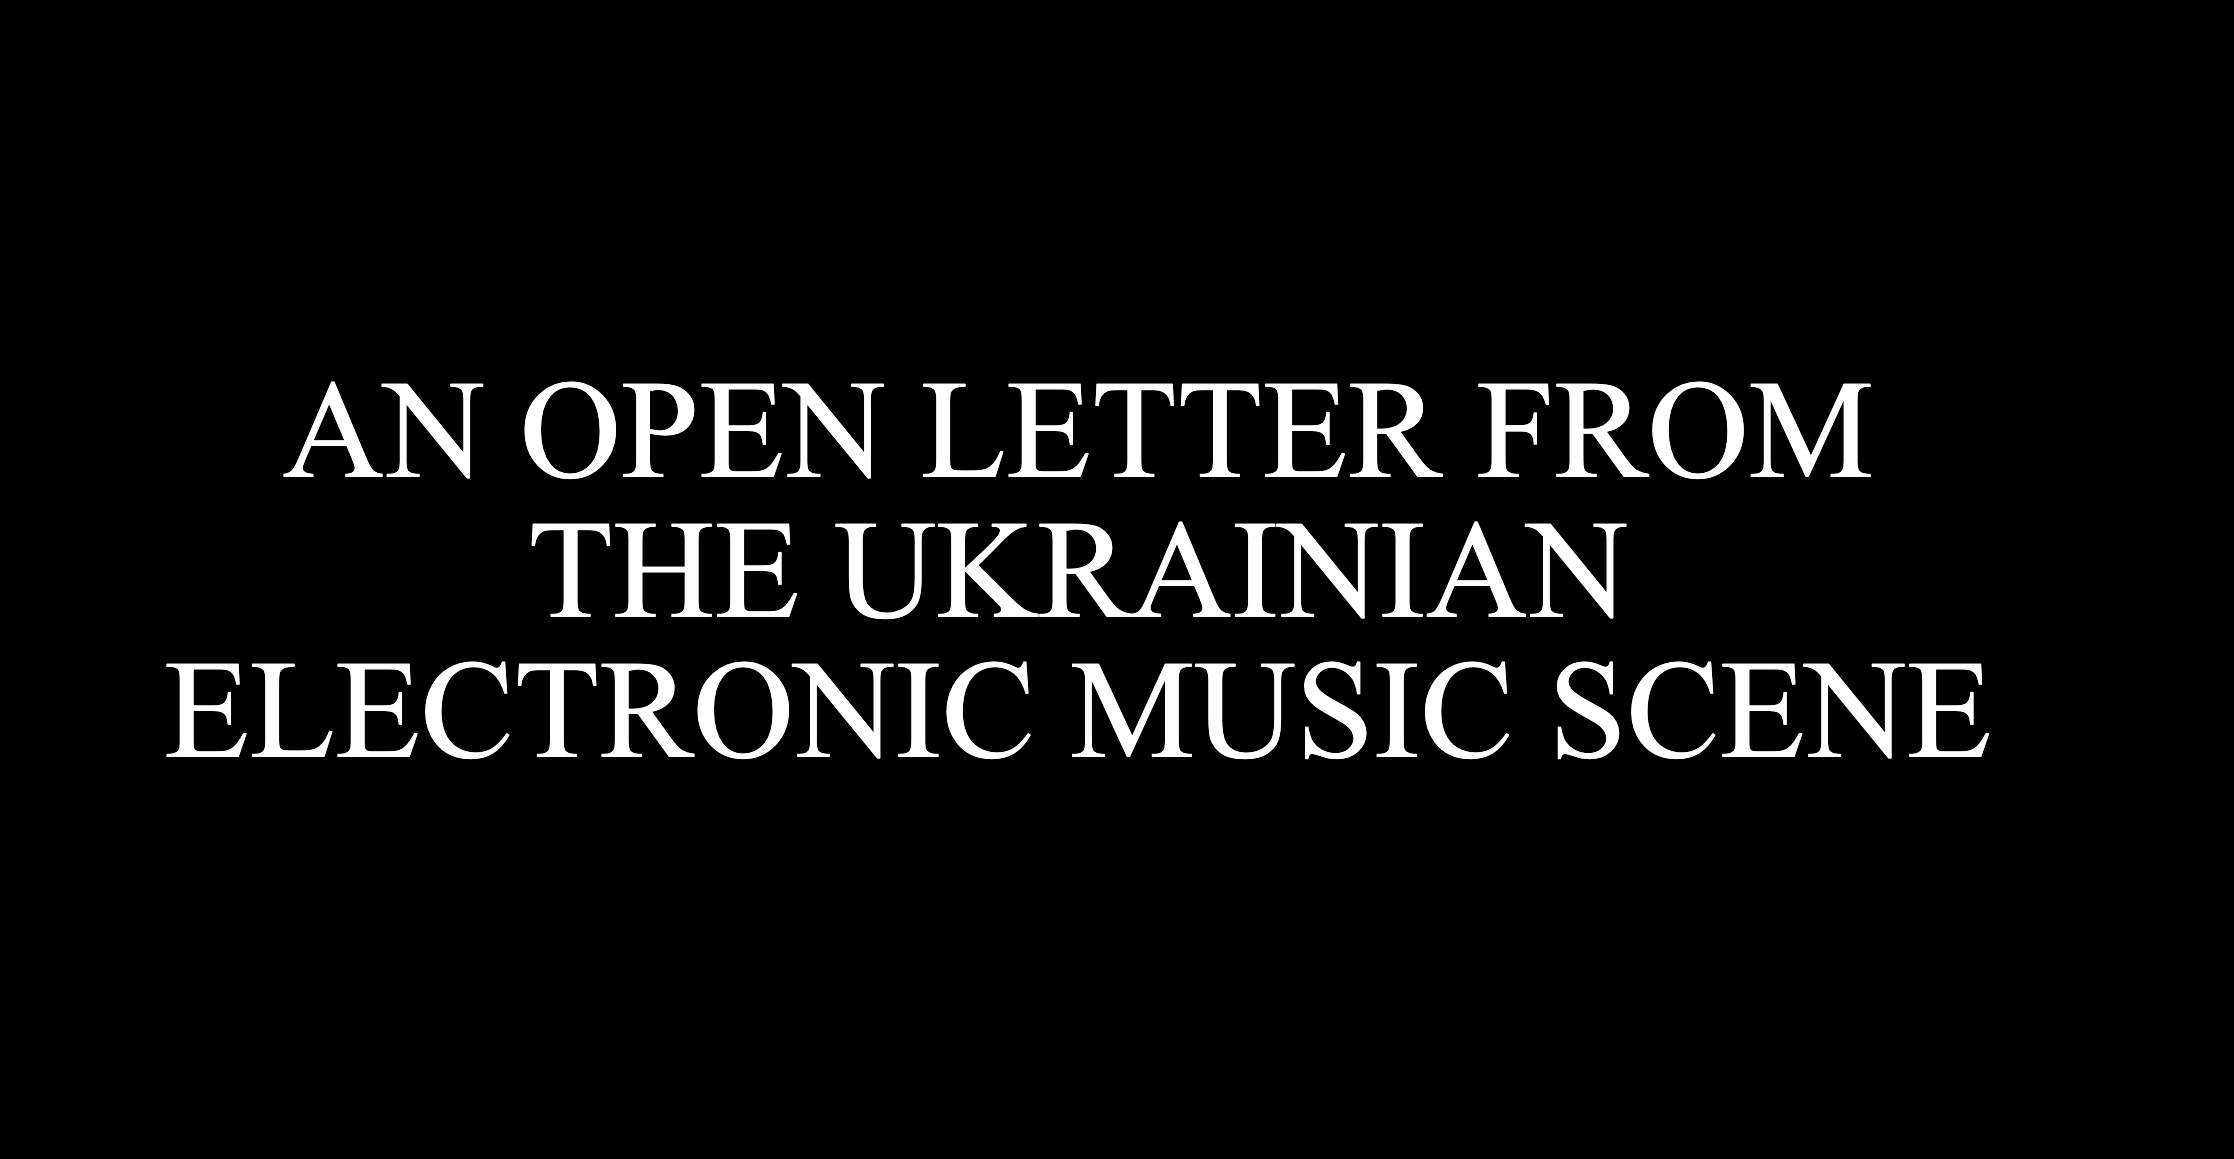 'Fight against Russian aggression': Ukrainian electronic music scene urges boycott in open letter image